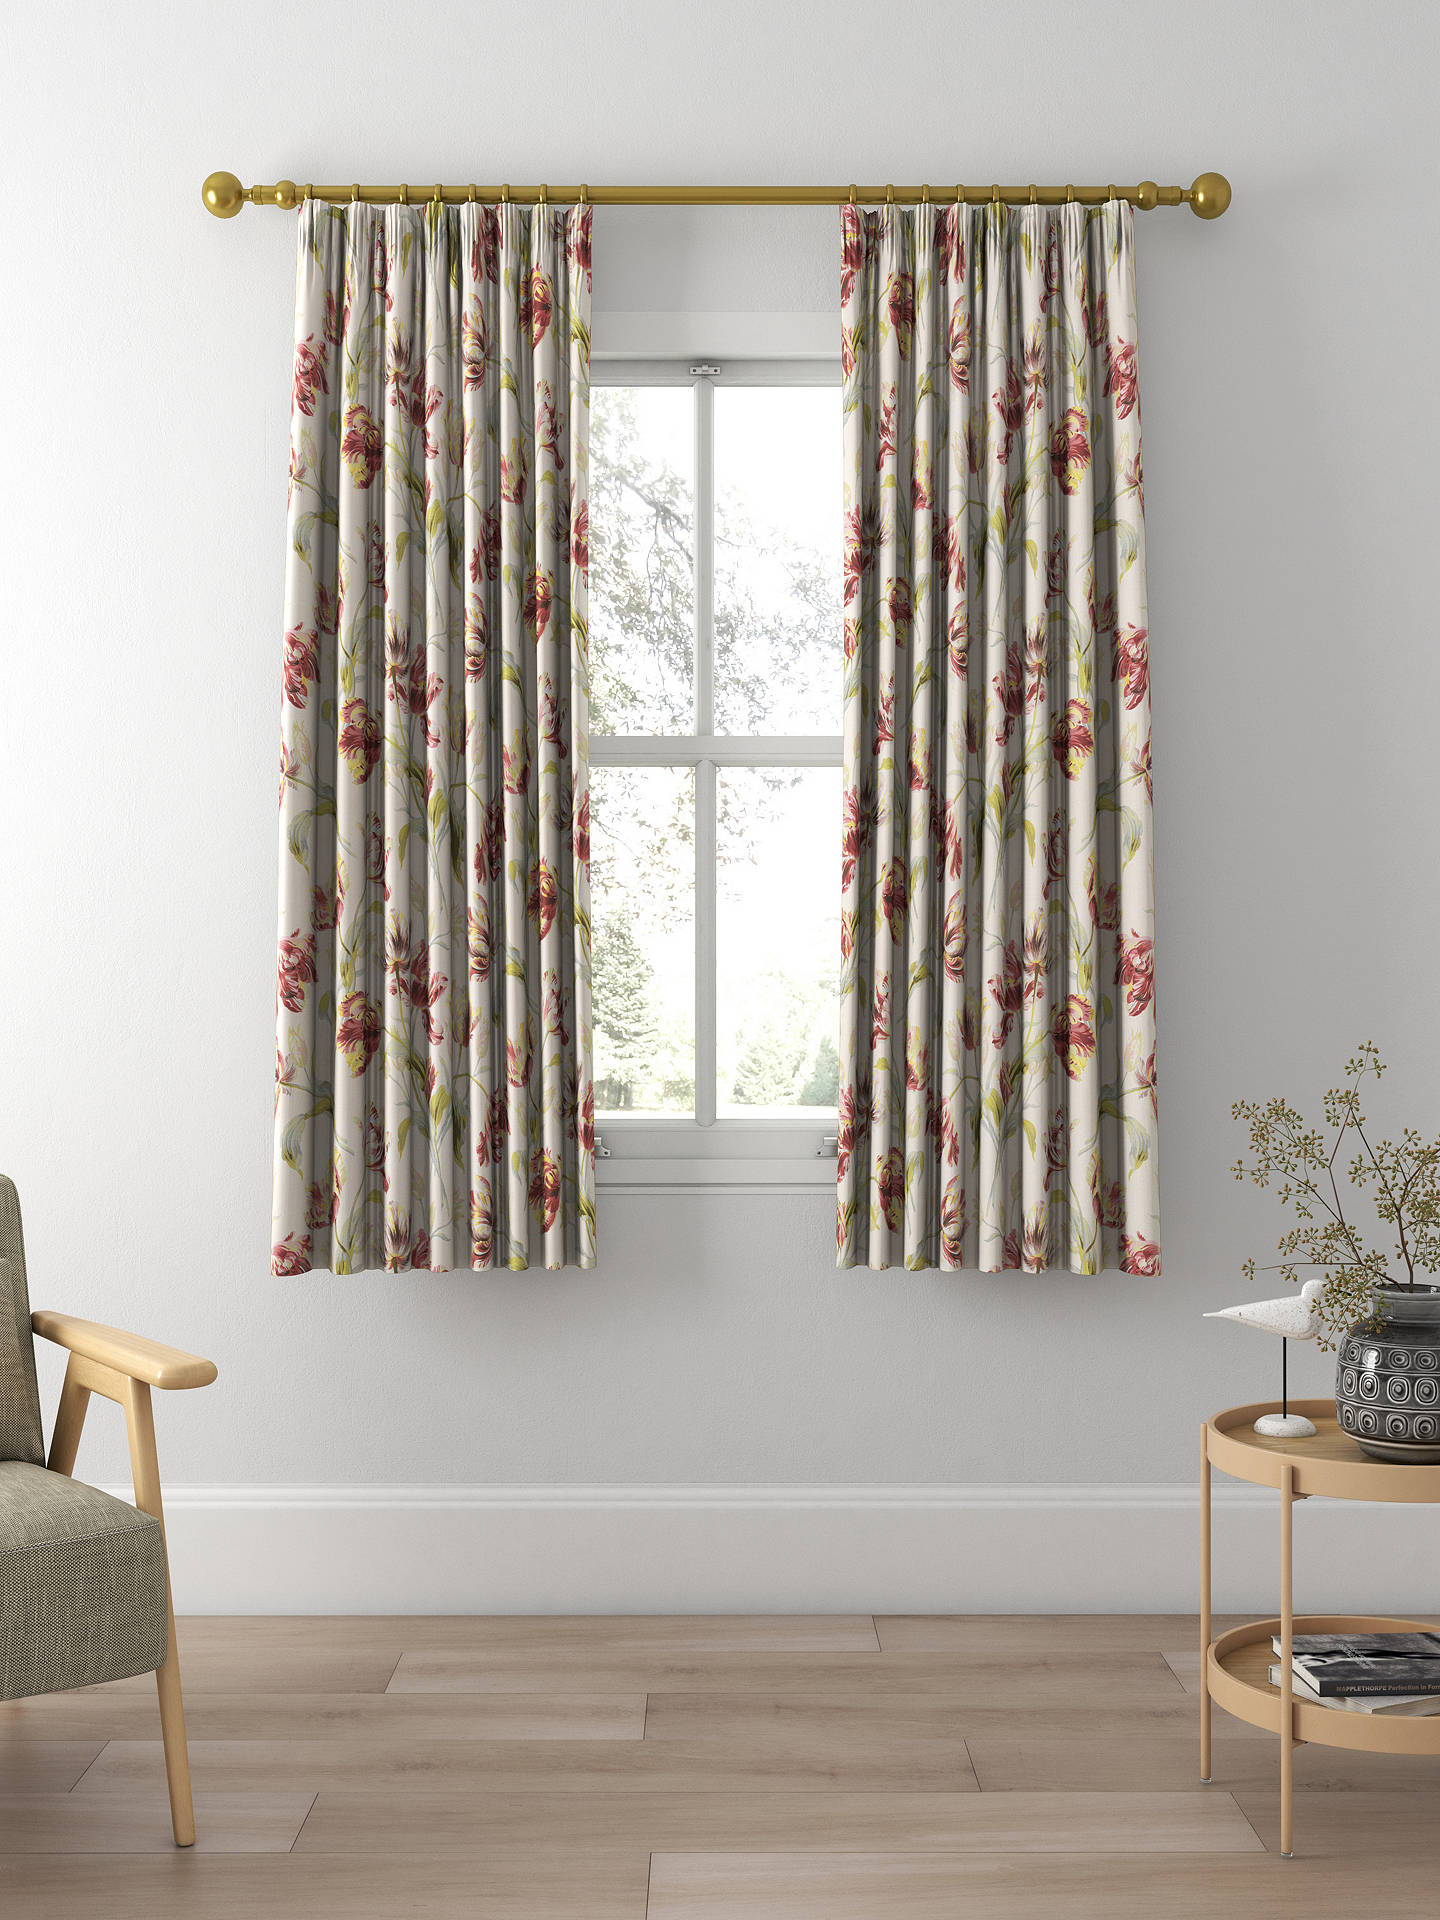 Laura Ashley Gosford Meadow Made to Measure Curtains, Cranberry